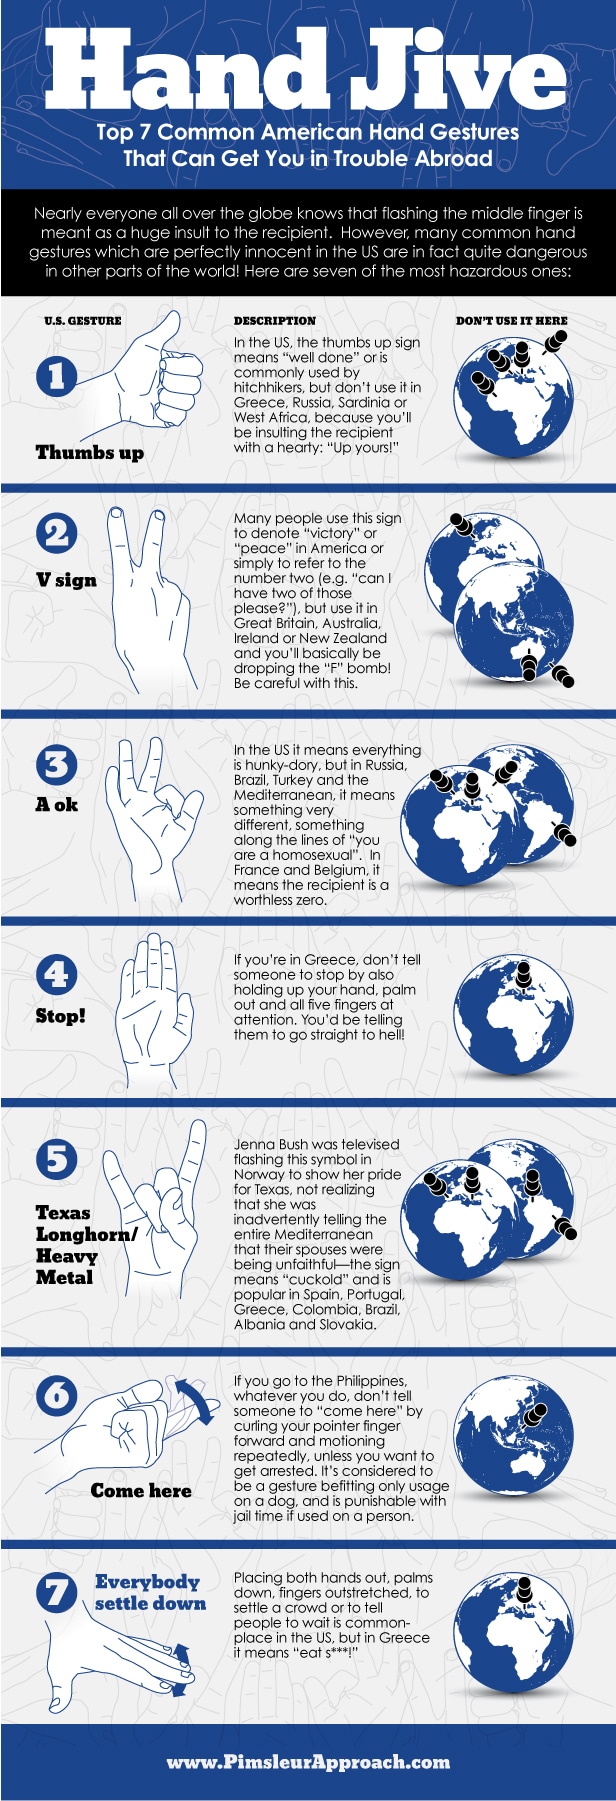 7 Common Hand Gestures That Could Spell Disaster [Infographic]